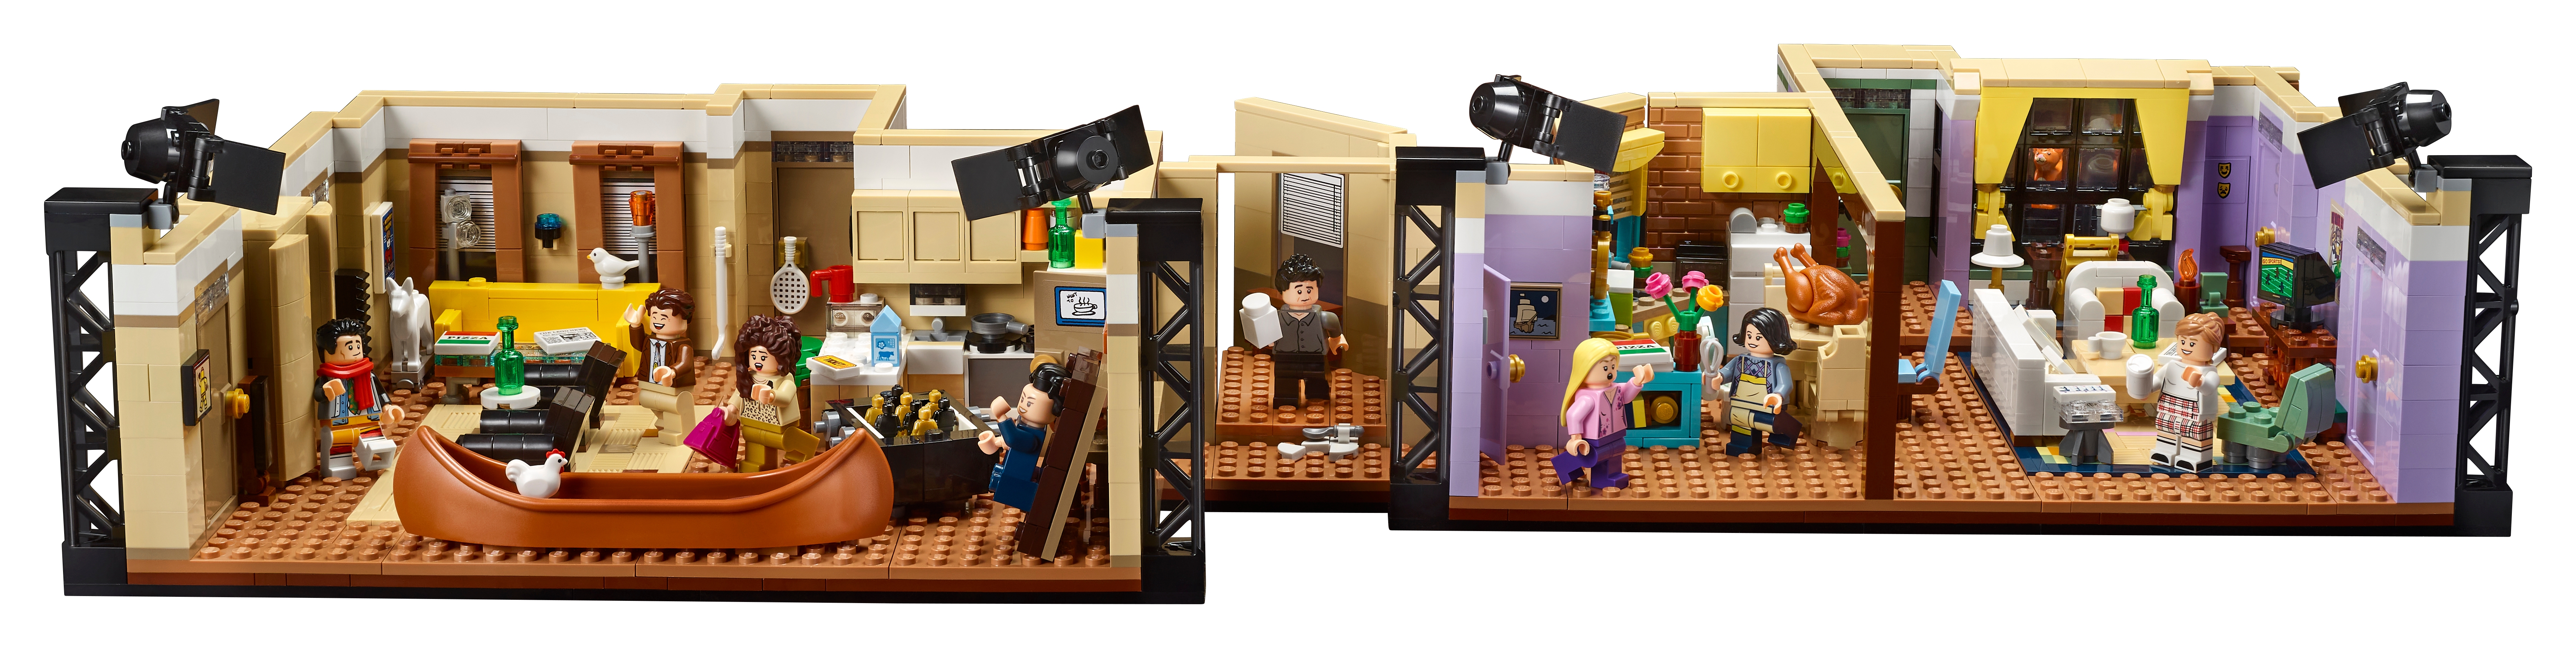 New 2,048 Piece Friends LEGO Set Includes Both Apartments